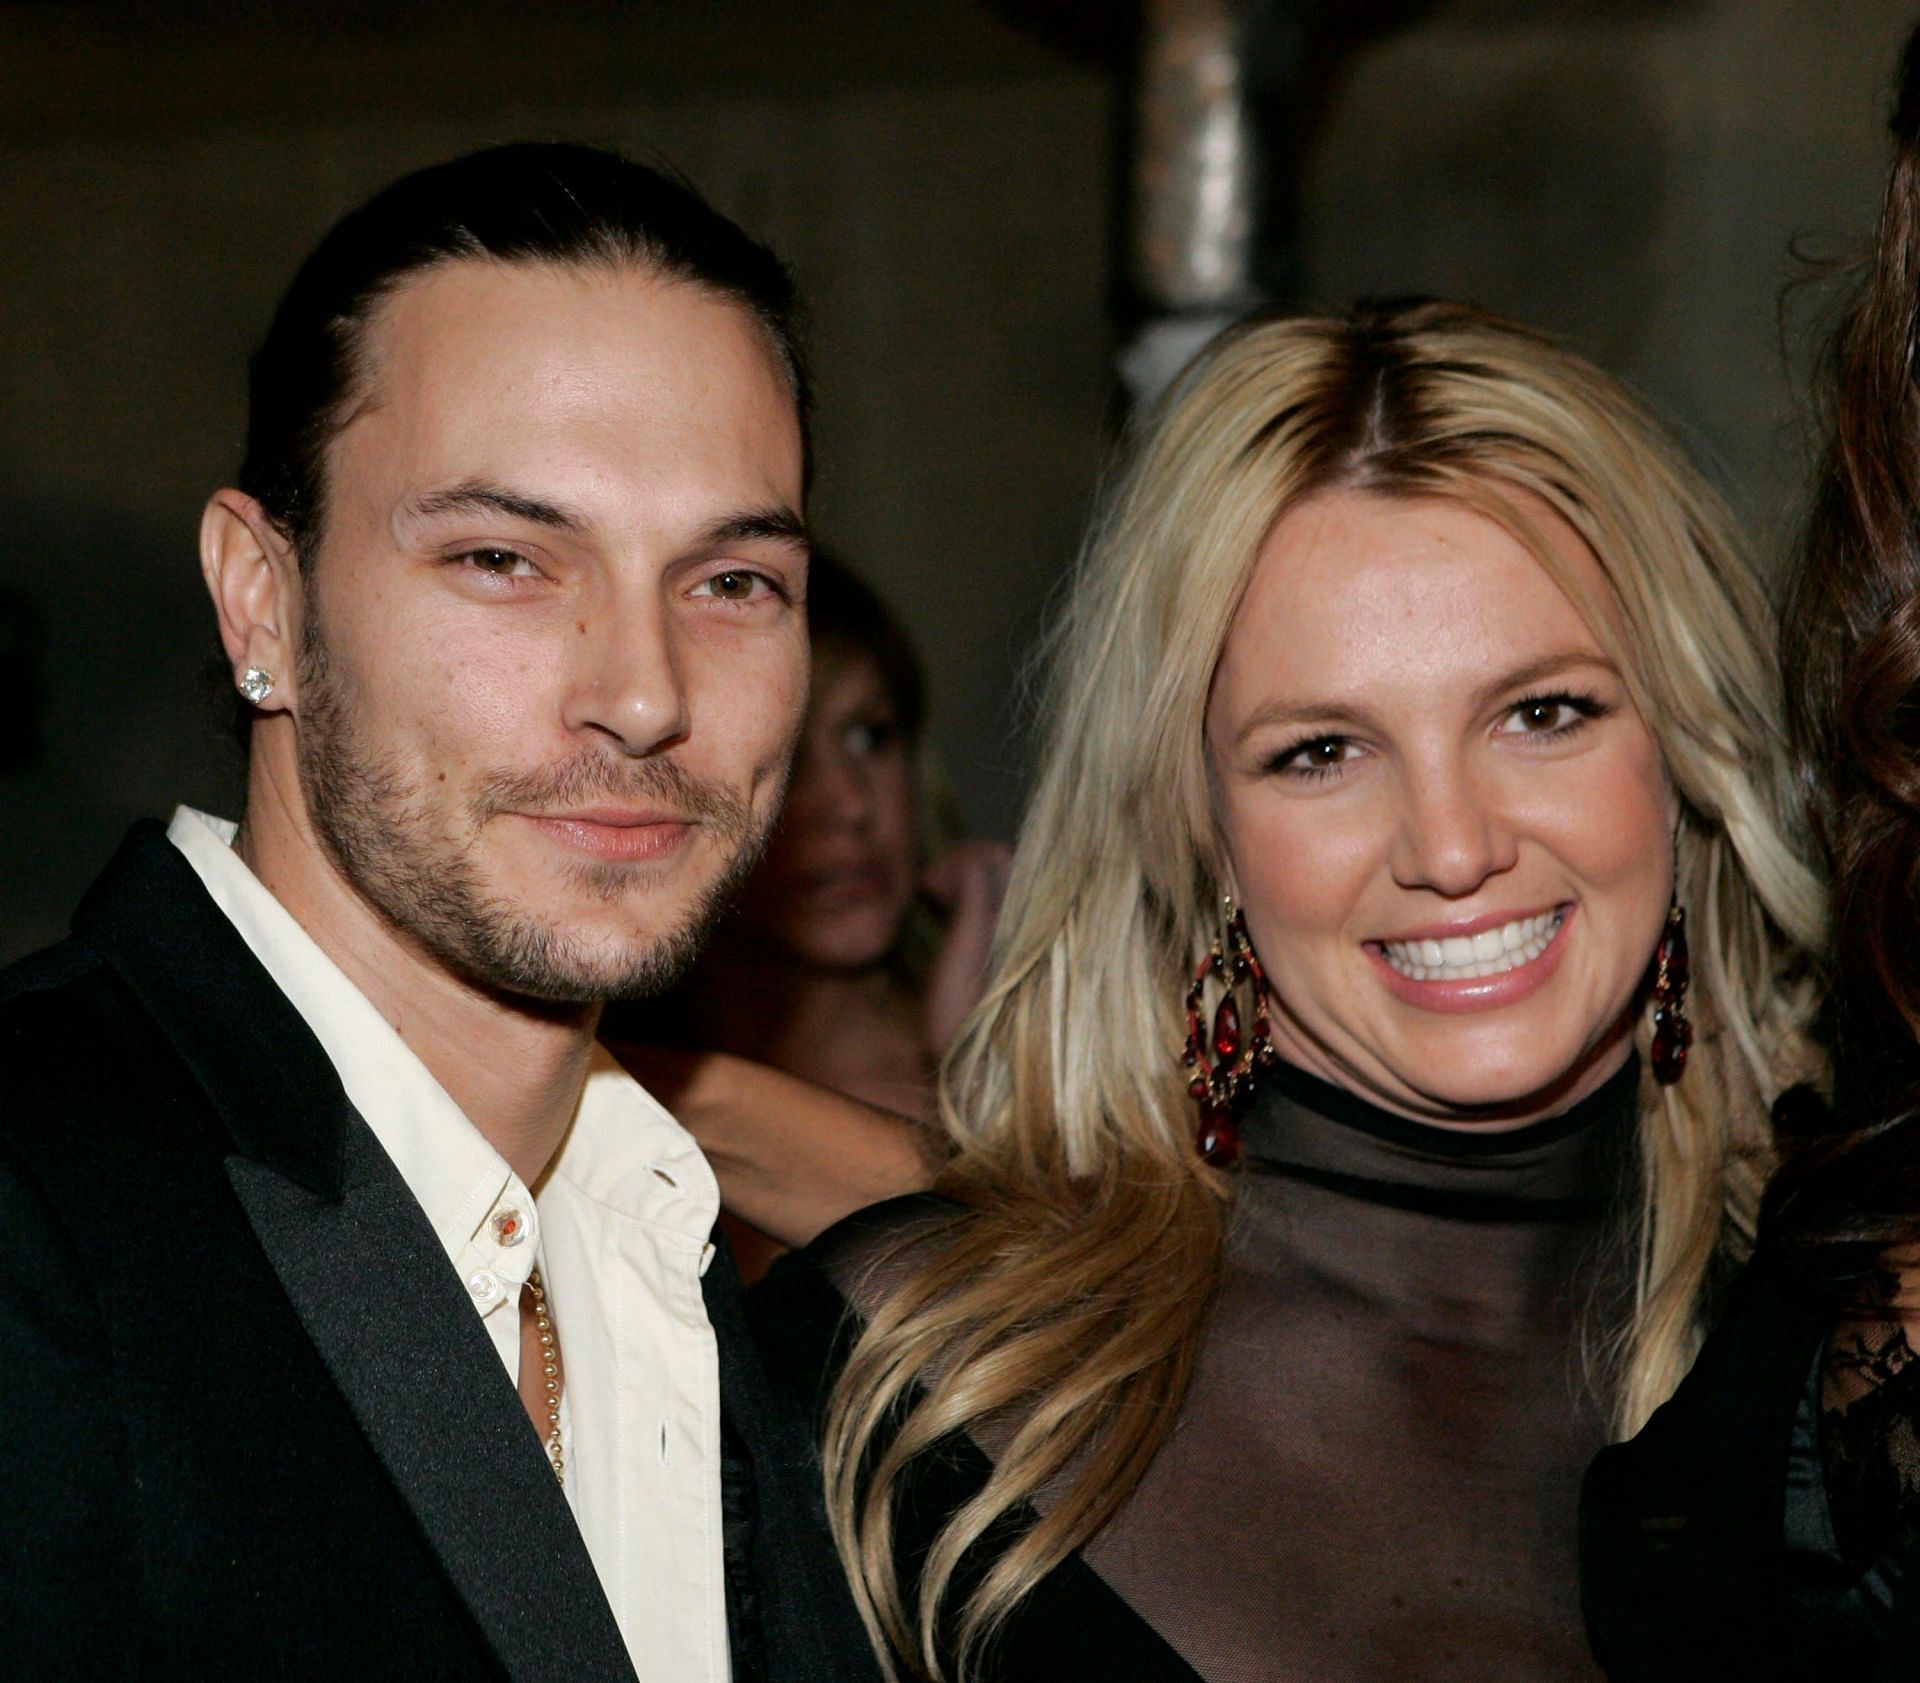 Kevin Federline criticized online after posting video of Britney Spears with their children (Image via Getty Images)